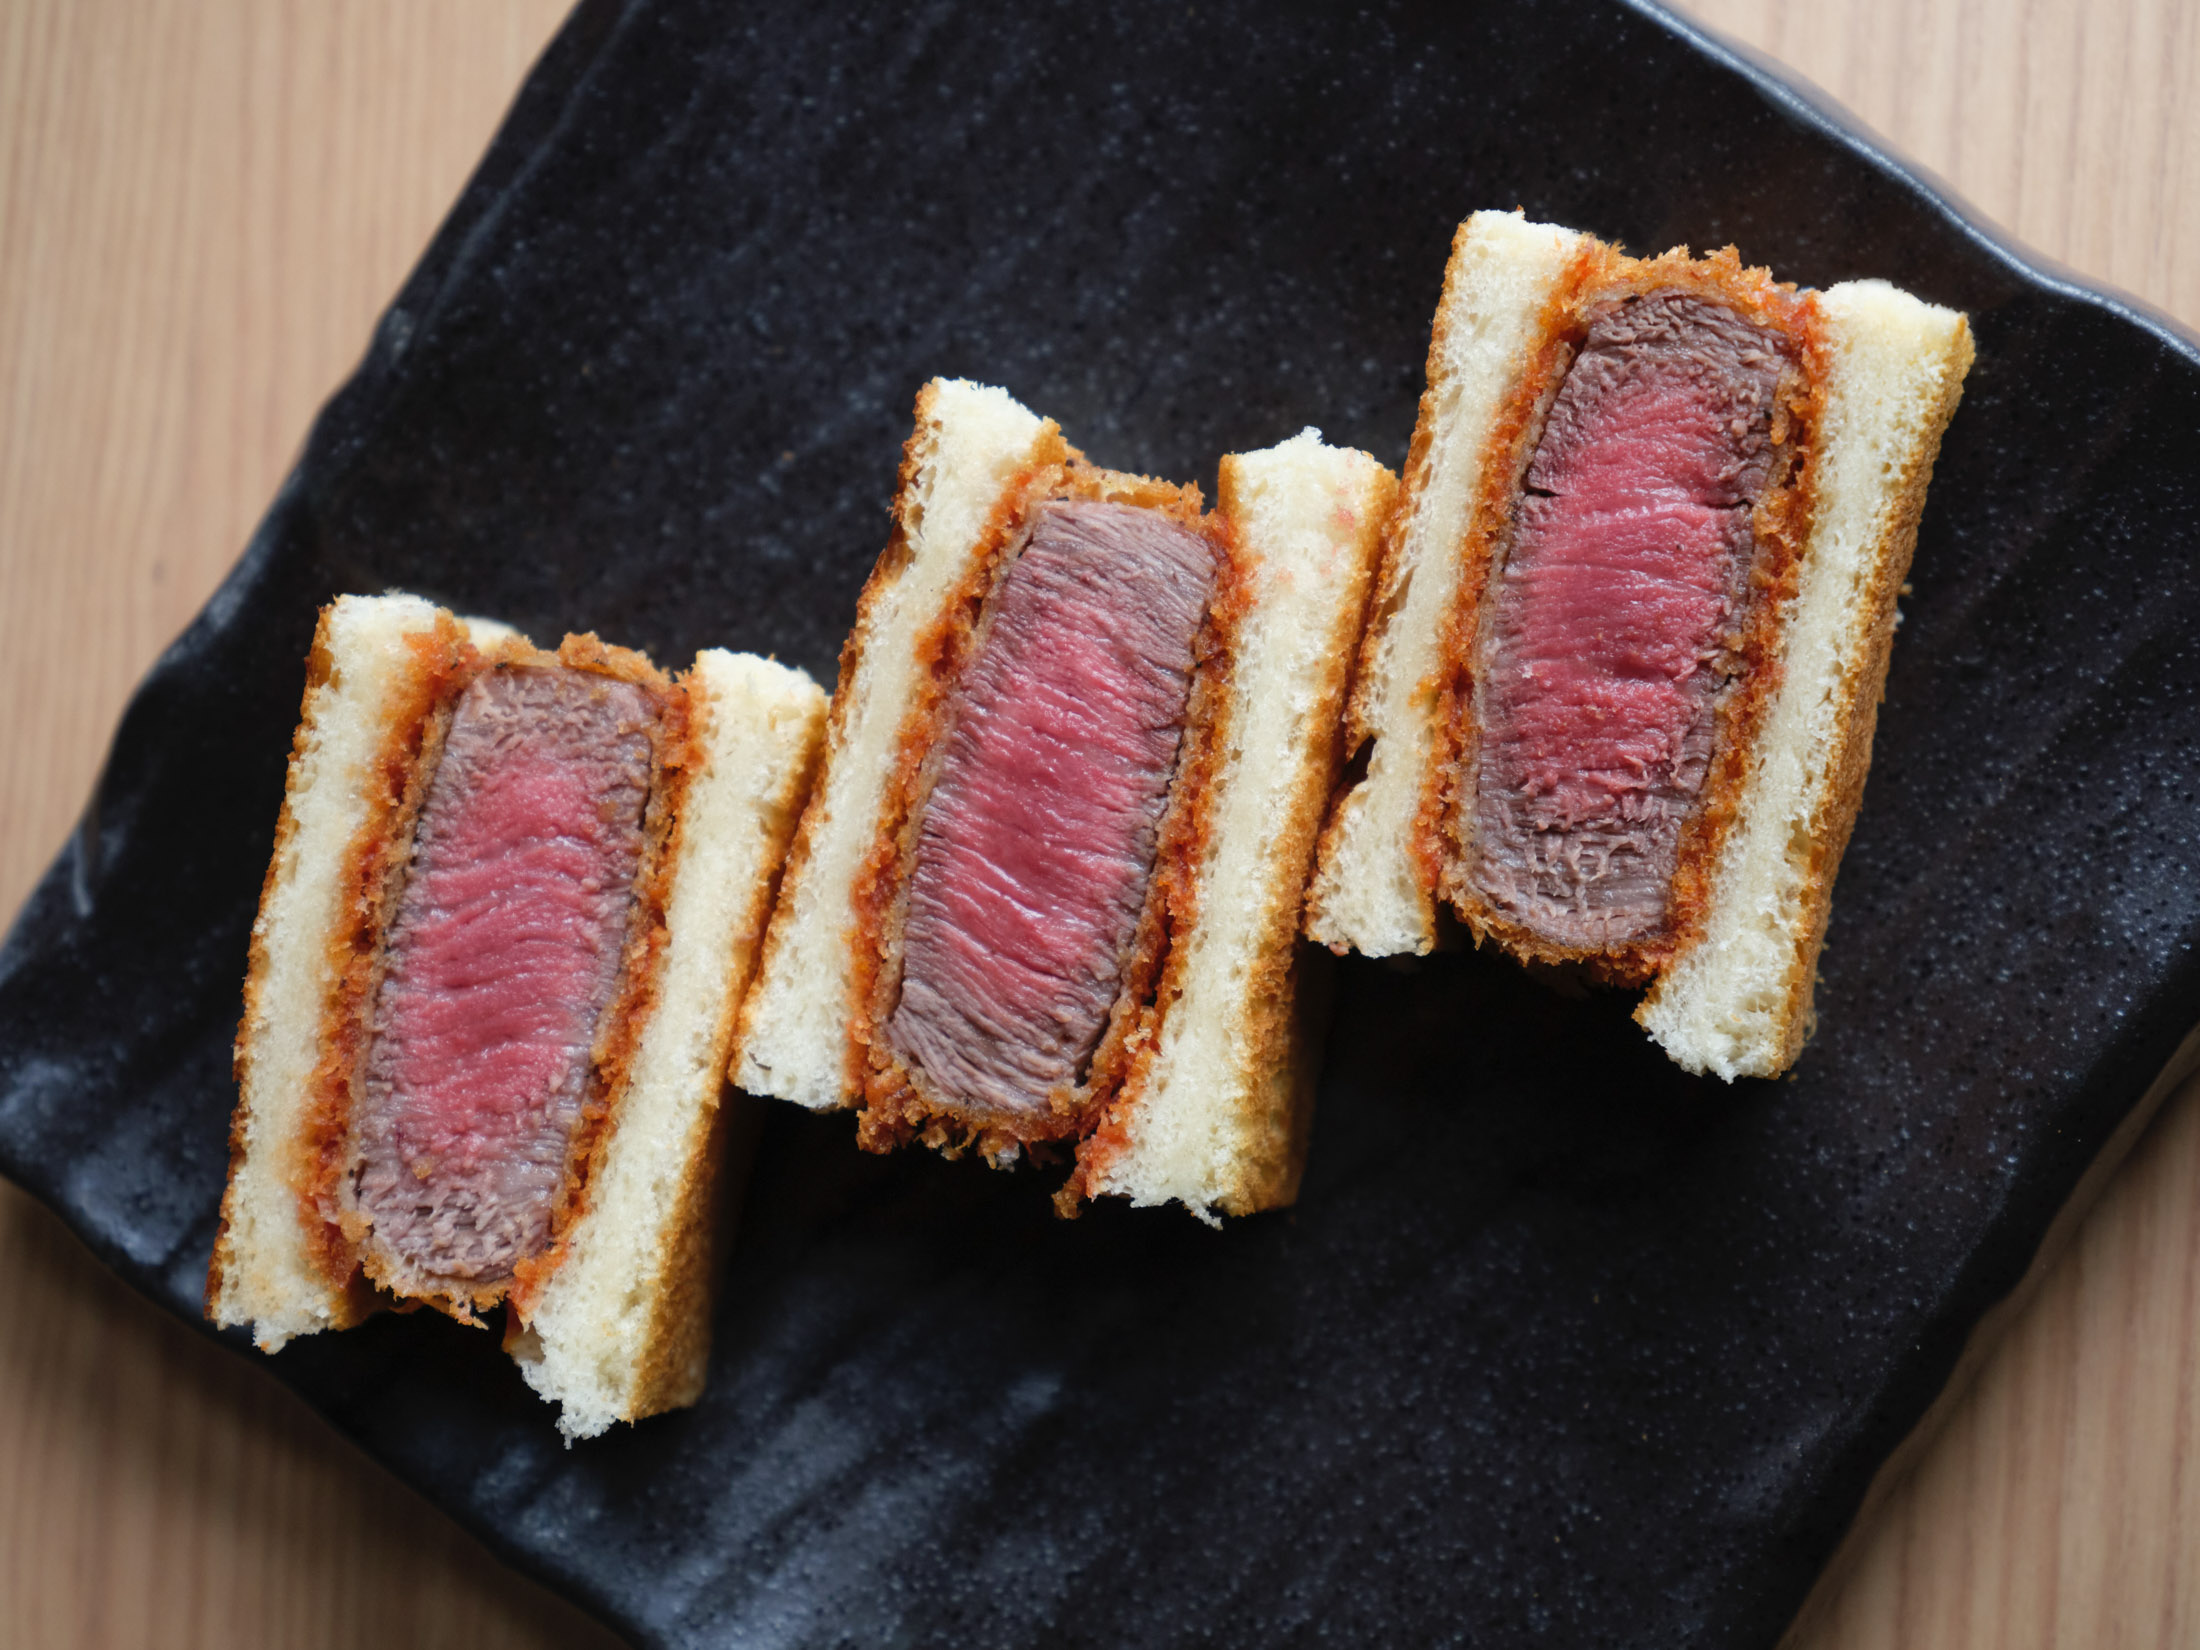 Japanese Wagyu beef menu created by top chefs in the USA